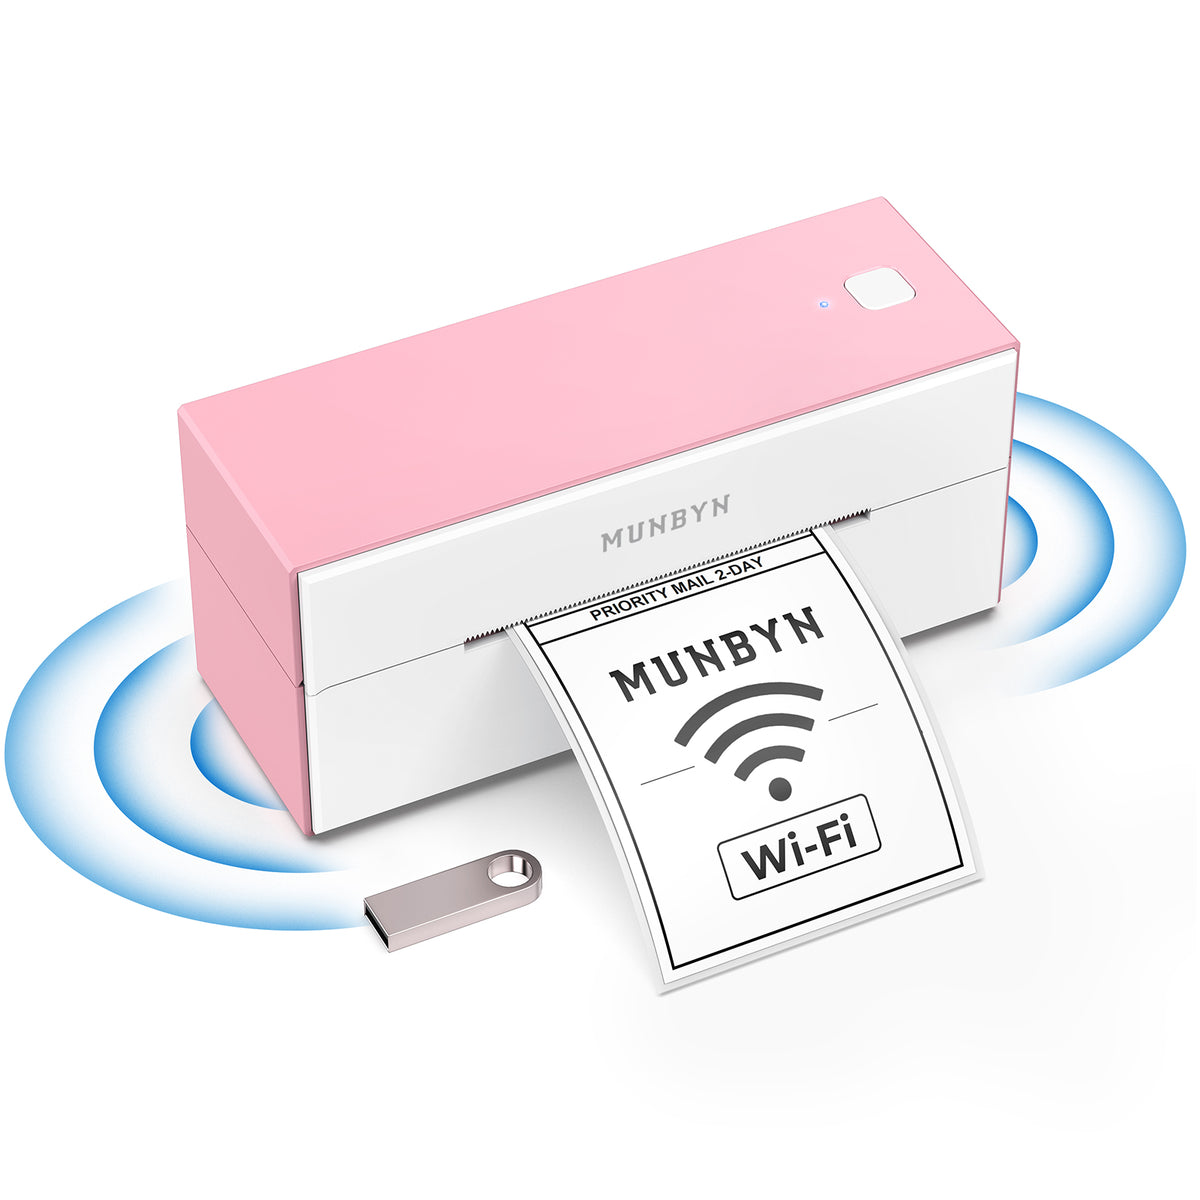 MUNBYN P129S pink wireless printer connects easily to your devices through WiFi, allowing for seamless integration into your existing workflow.